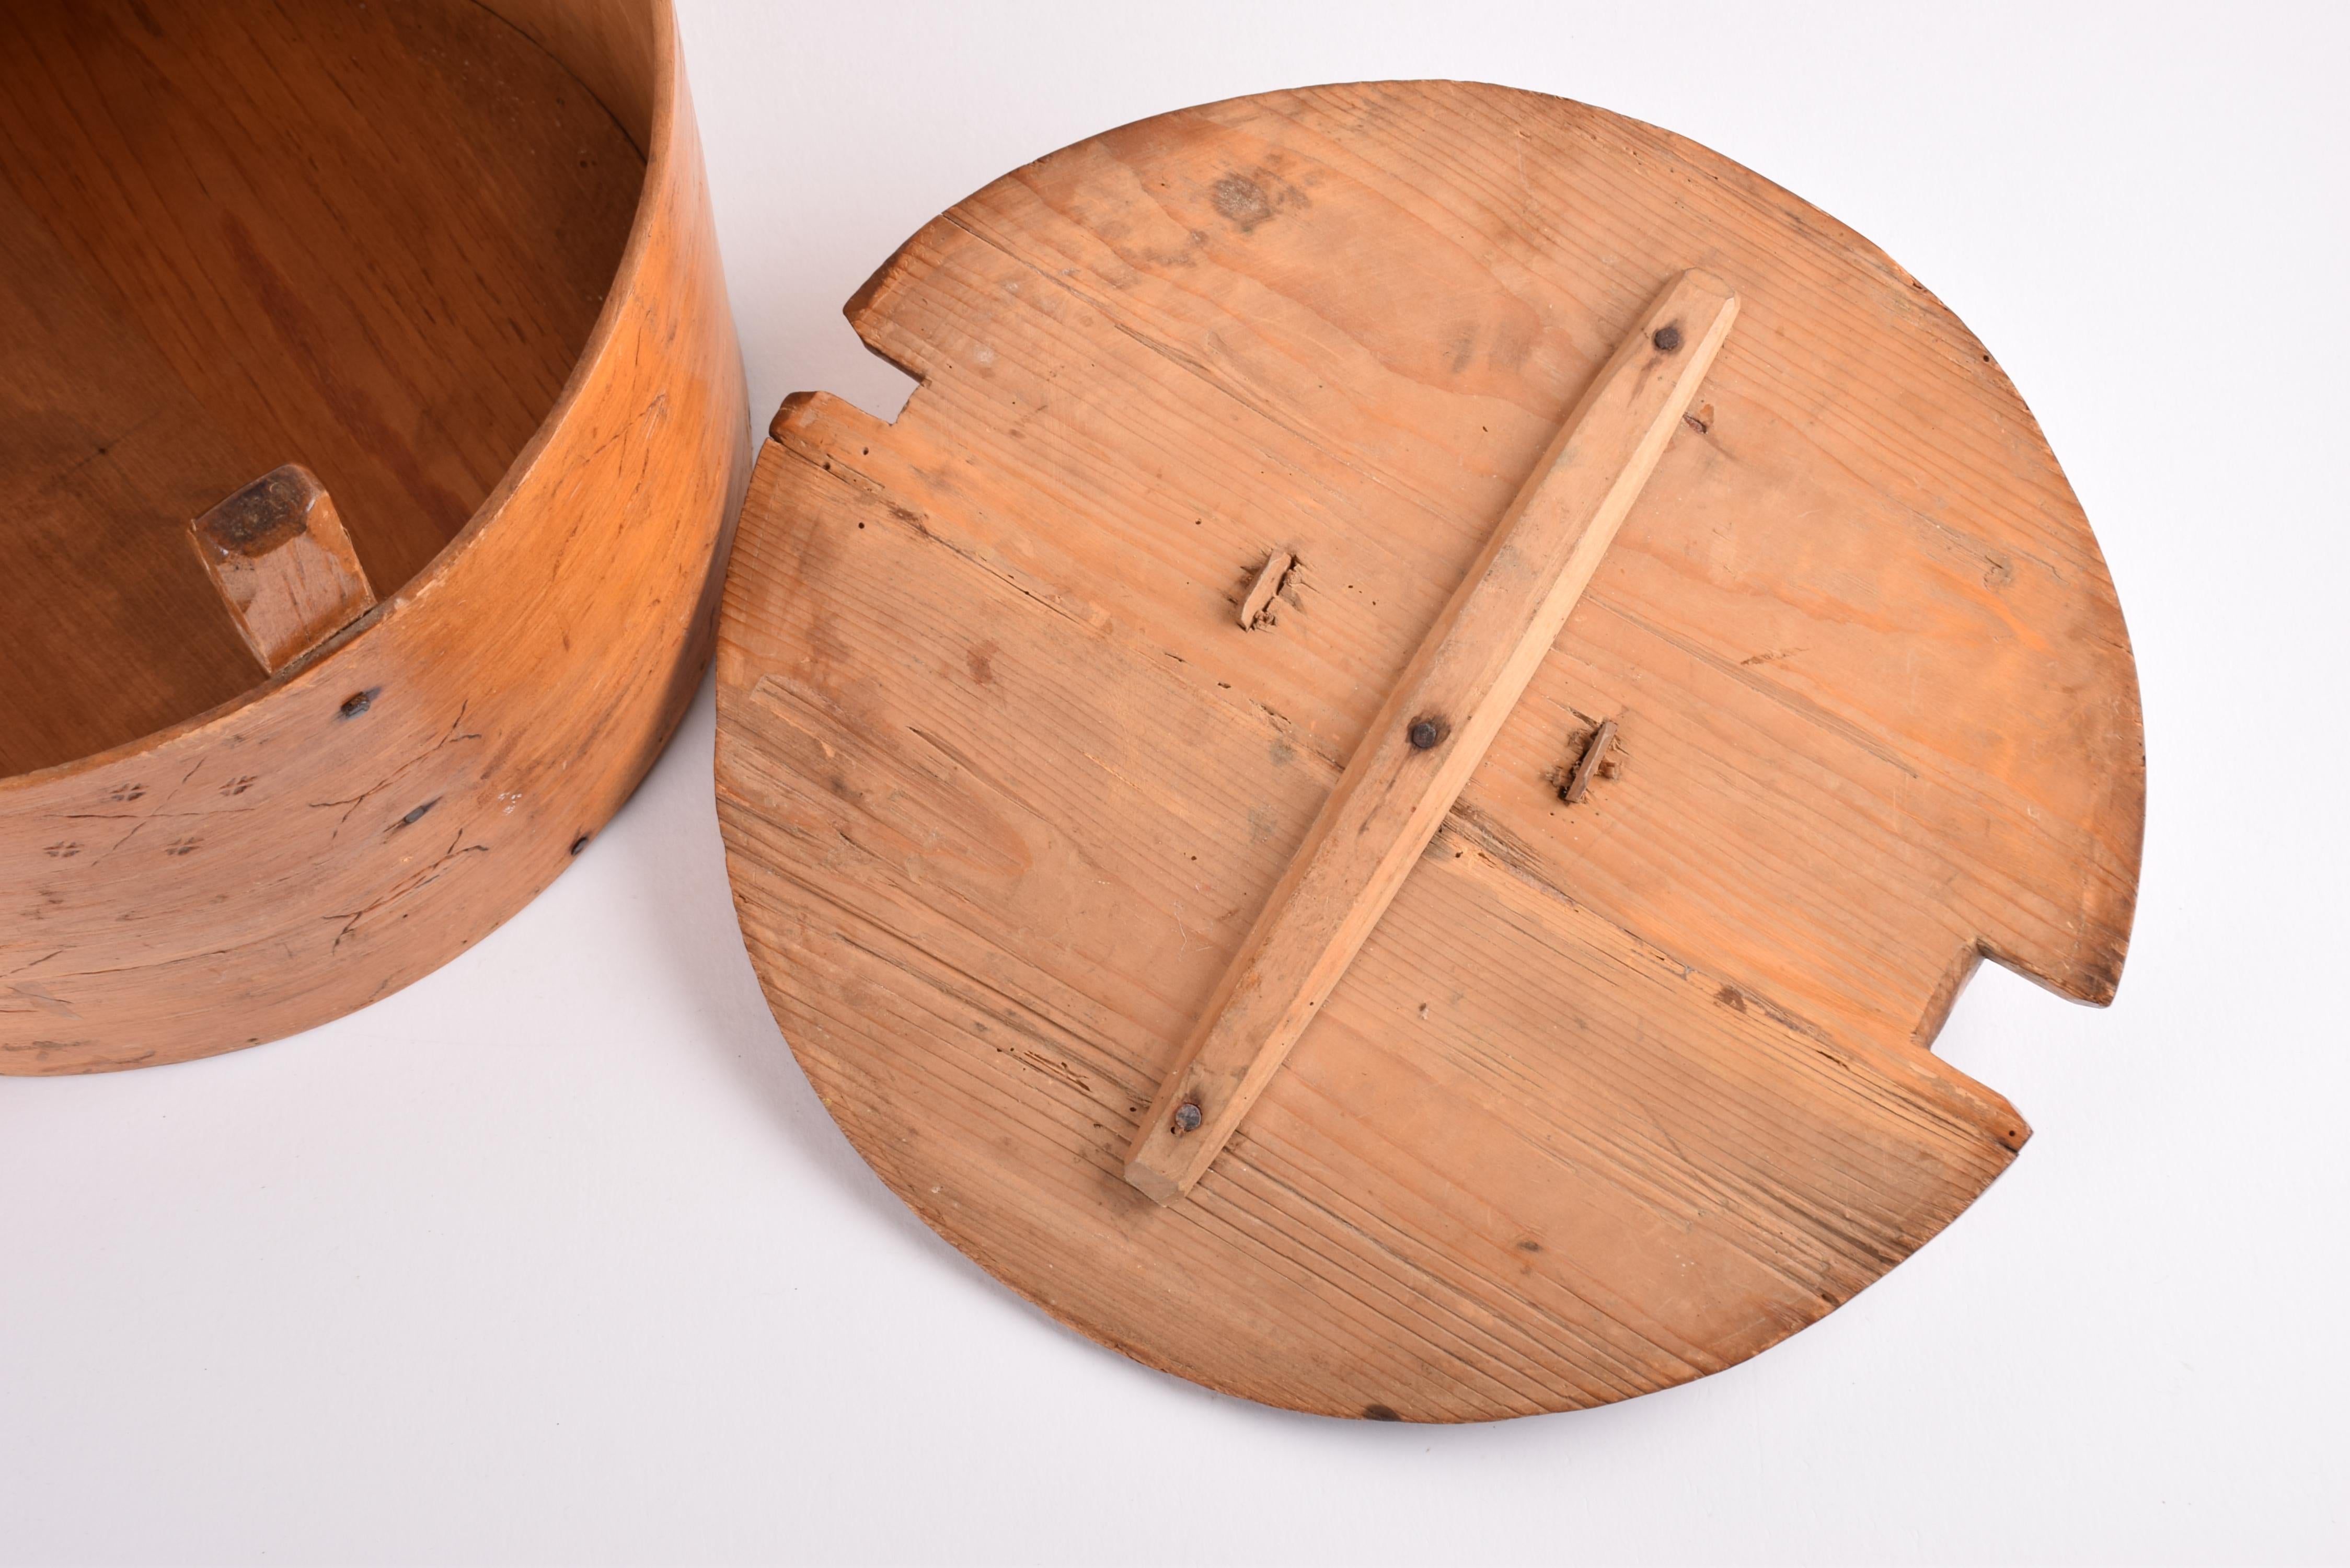 Antique Scandinavian Round Storage Box “Tejne” Decorated Pine, Late 19th Century For Sale 5